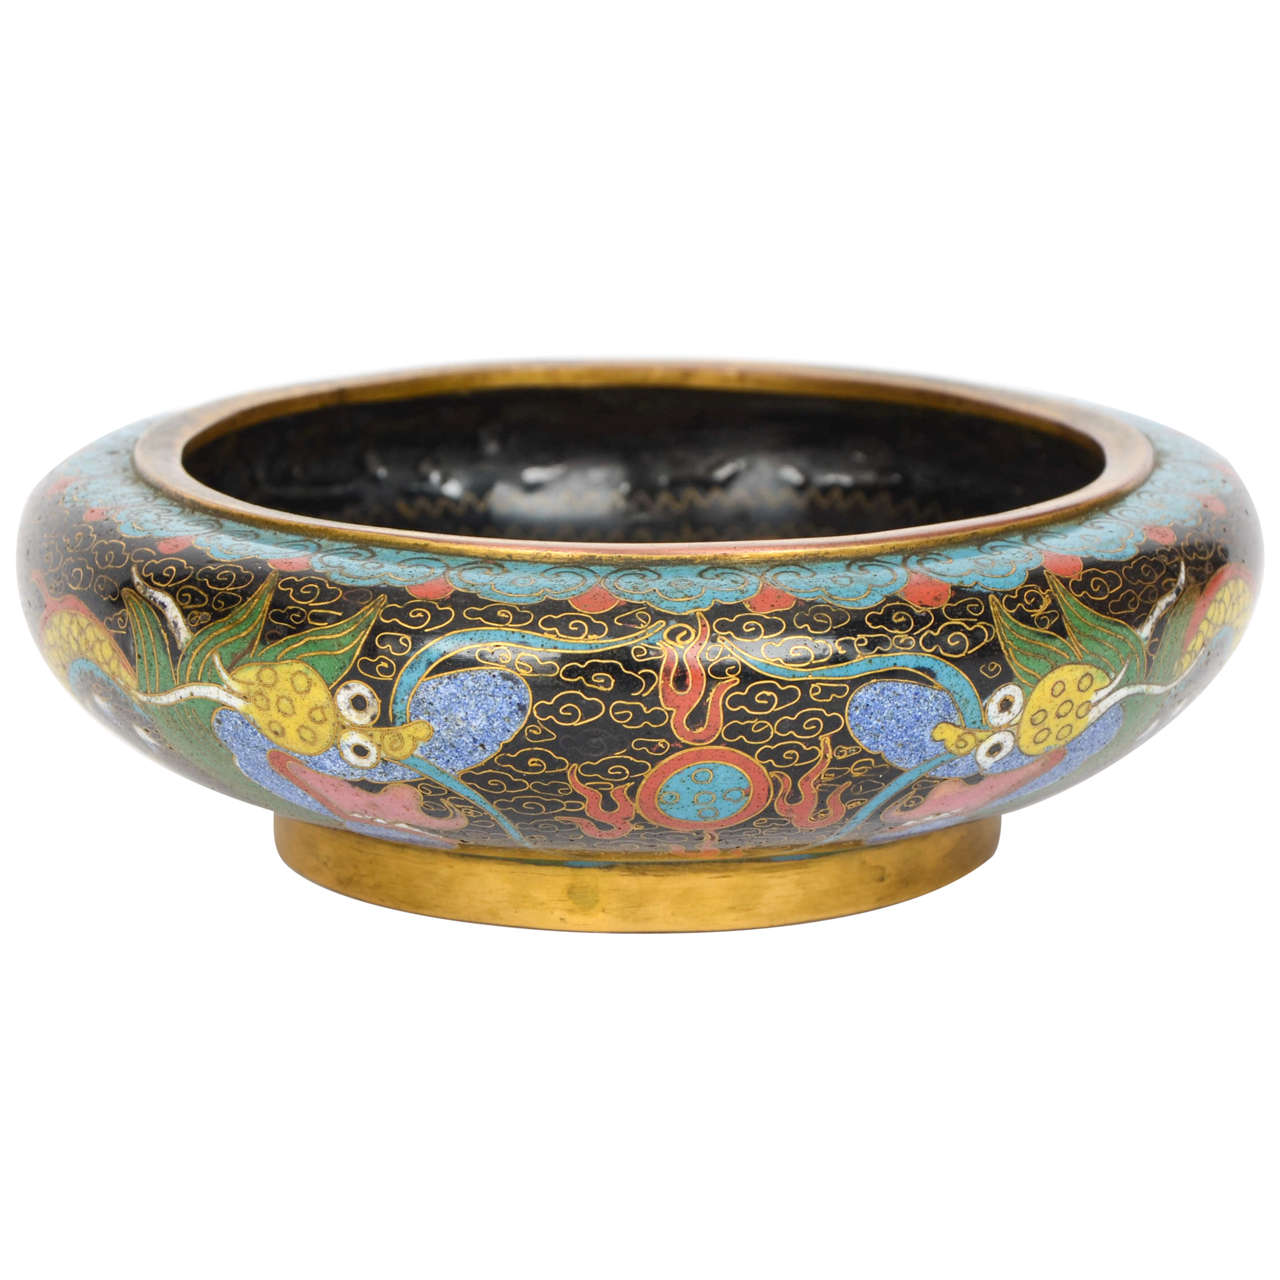 Early19thC, Chinese, CLOlSONNE BOWL, Mythical 5-Claw Dragons chasing pearls.